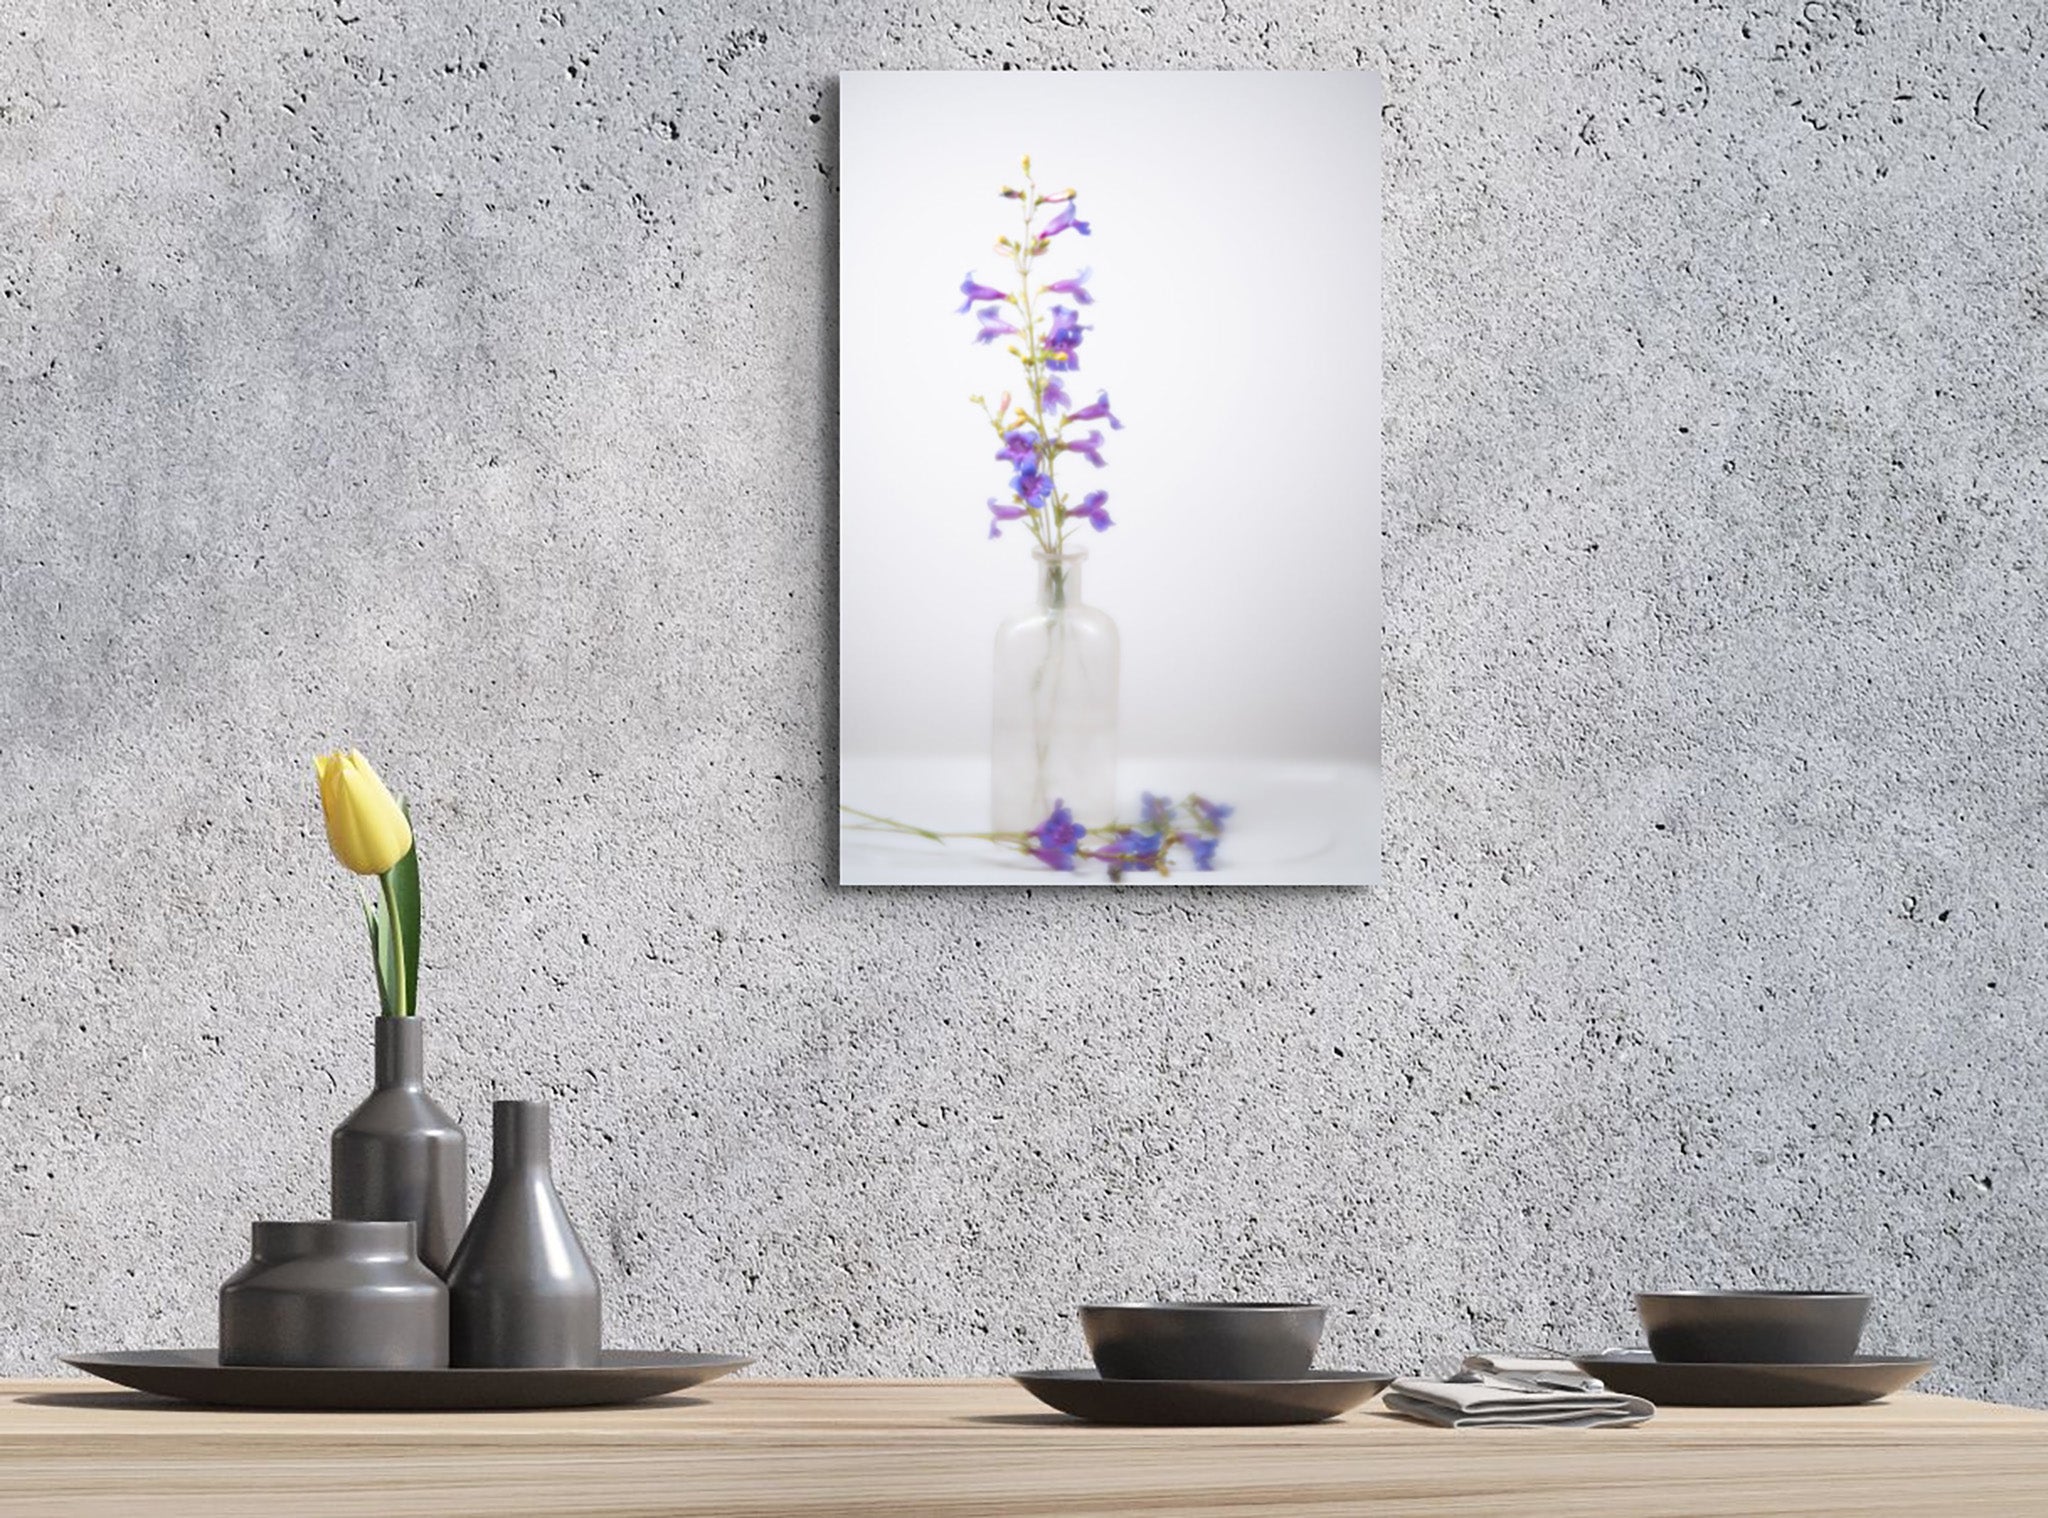 Picture hanging on the wall of a dining room with a set table. The picture is a fine art photograph of wildflowers in a jar by Cameron Dreaux. 